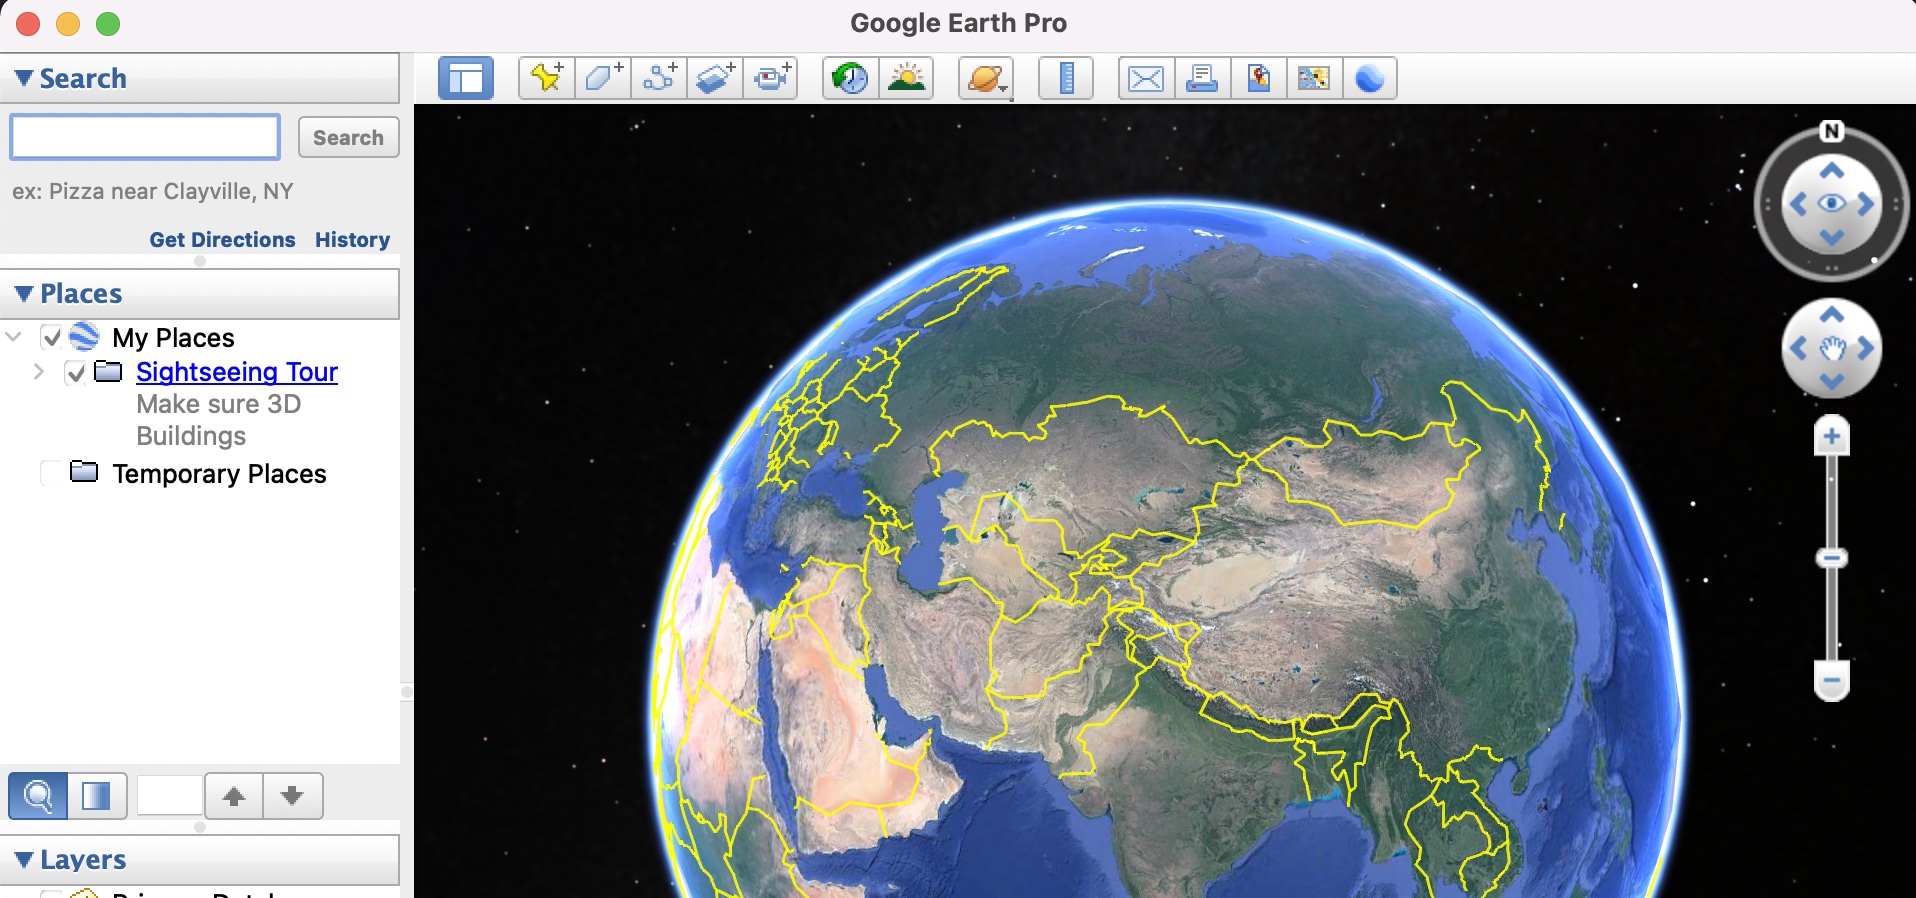 How to find your house on Google Earth